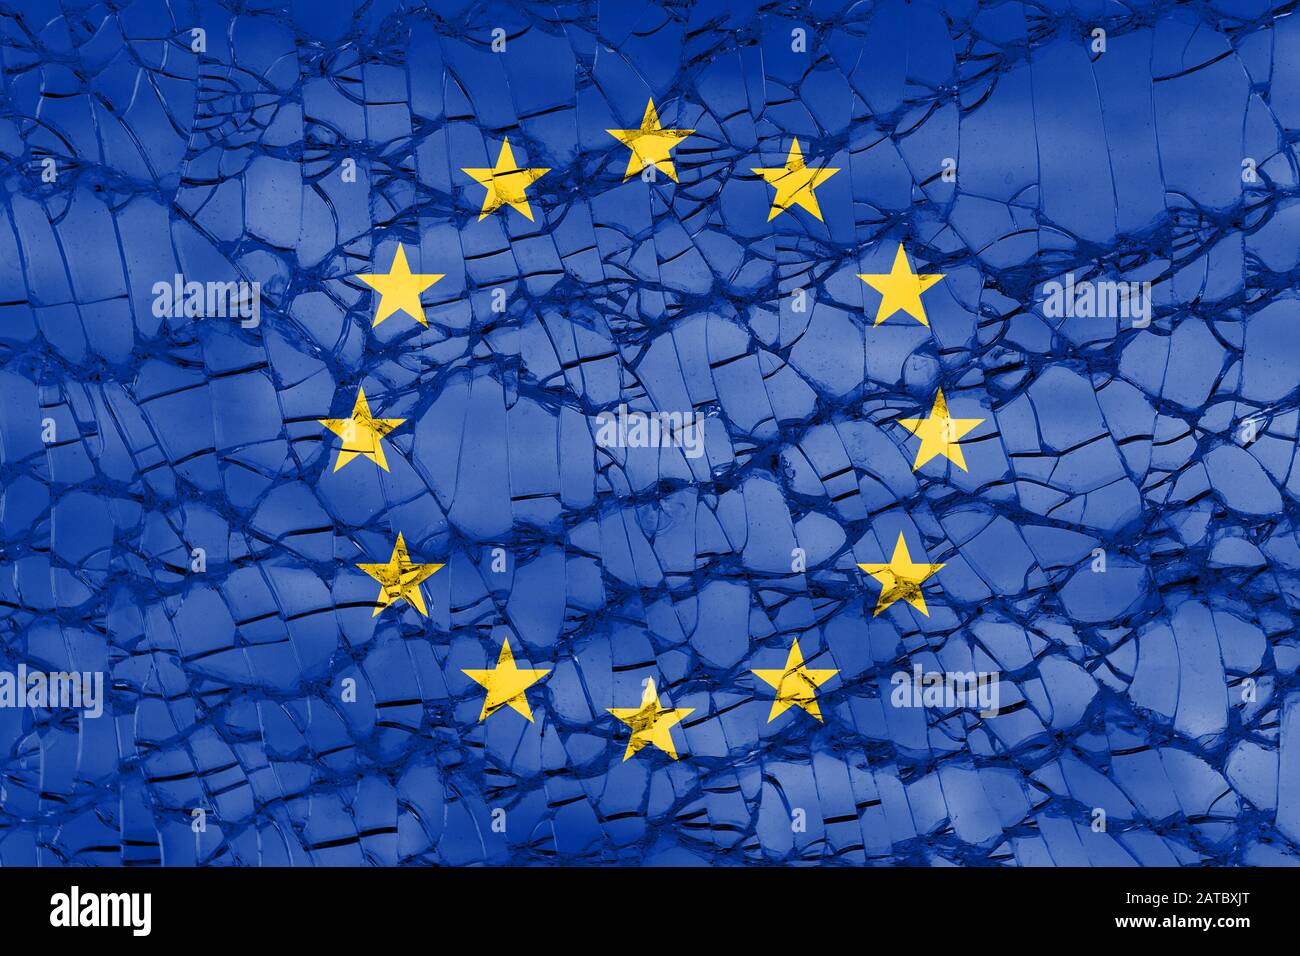 flag of European Union EU with shattered or cracked glass texture - europe crisis breakup or disintegration concept Stock Photo